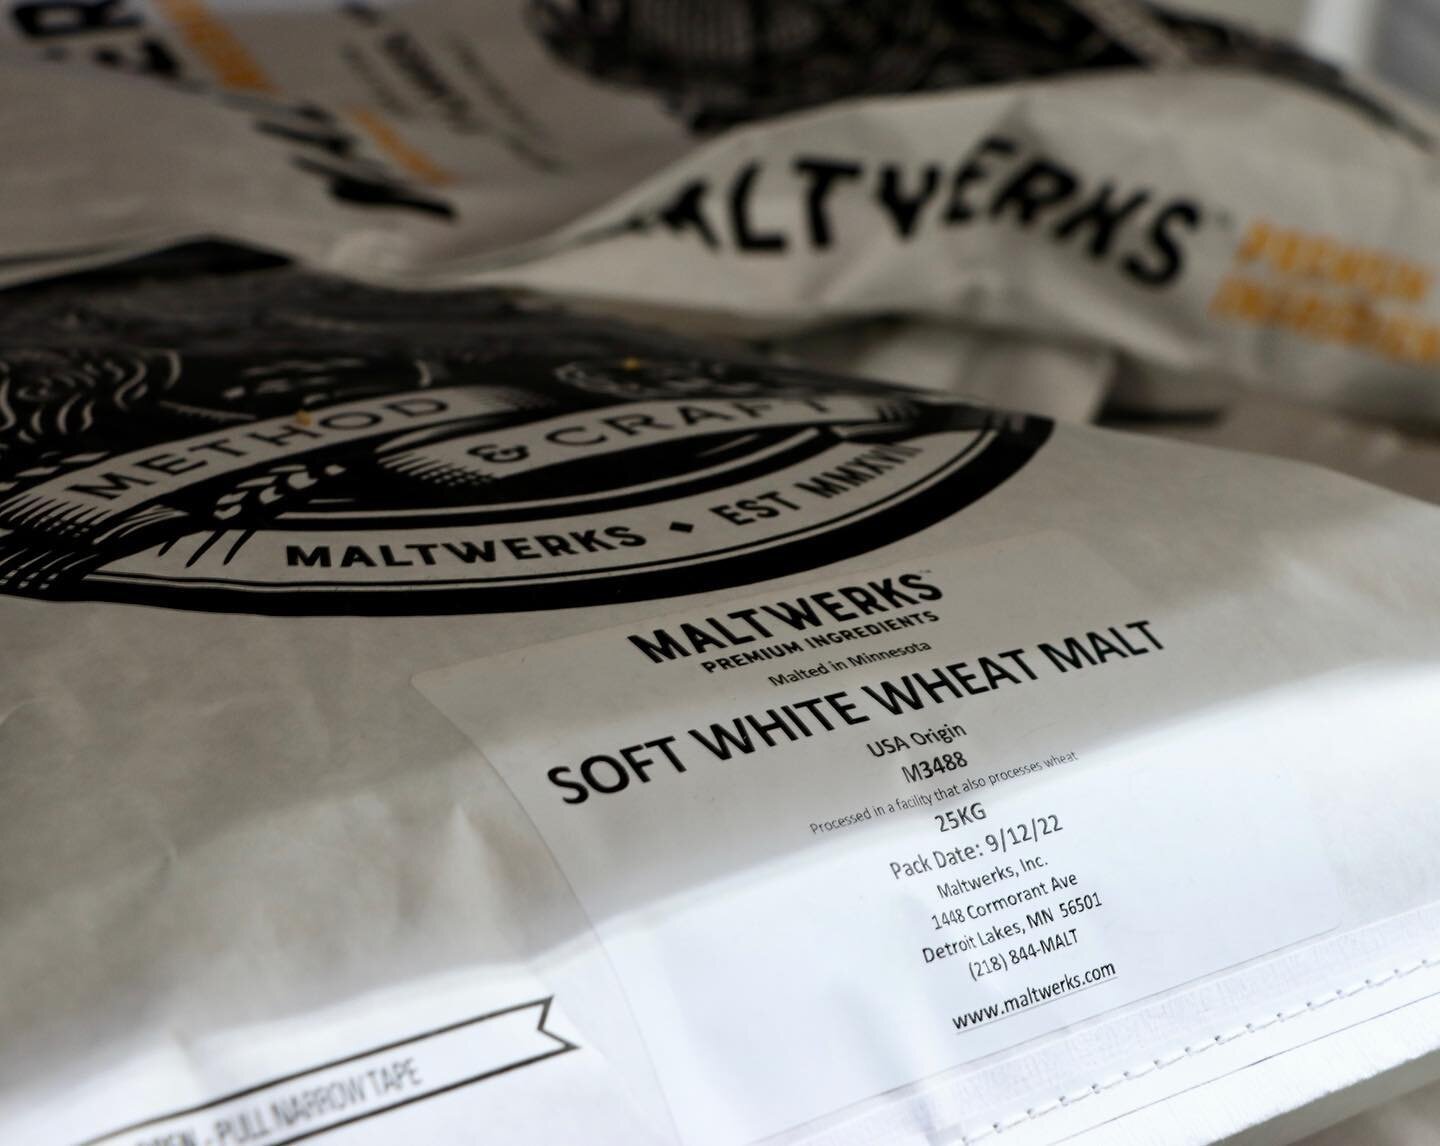 White Wheat Flakes widely used in Witbier, available FRESH every week! ⁠
⁠
Looking for your very own delicious bags to brew with? 😉 Let us know, and we will add you to this weeks delivery! ⁠
⁠
⁠
⁠
⁠
⁠
⁠
⁠
⁠
⁠
⁠
#maltwerks #craftmalt #craftbeer #drin